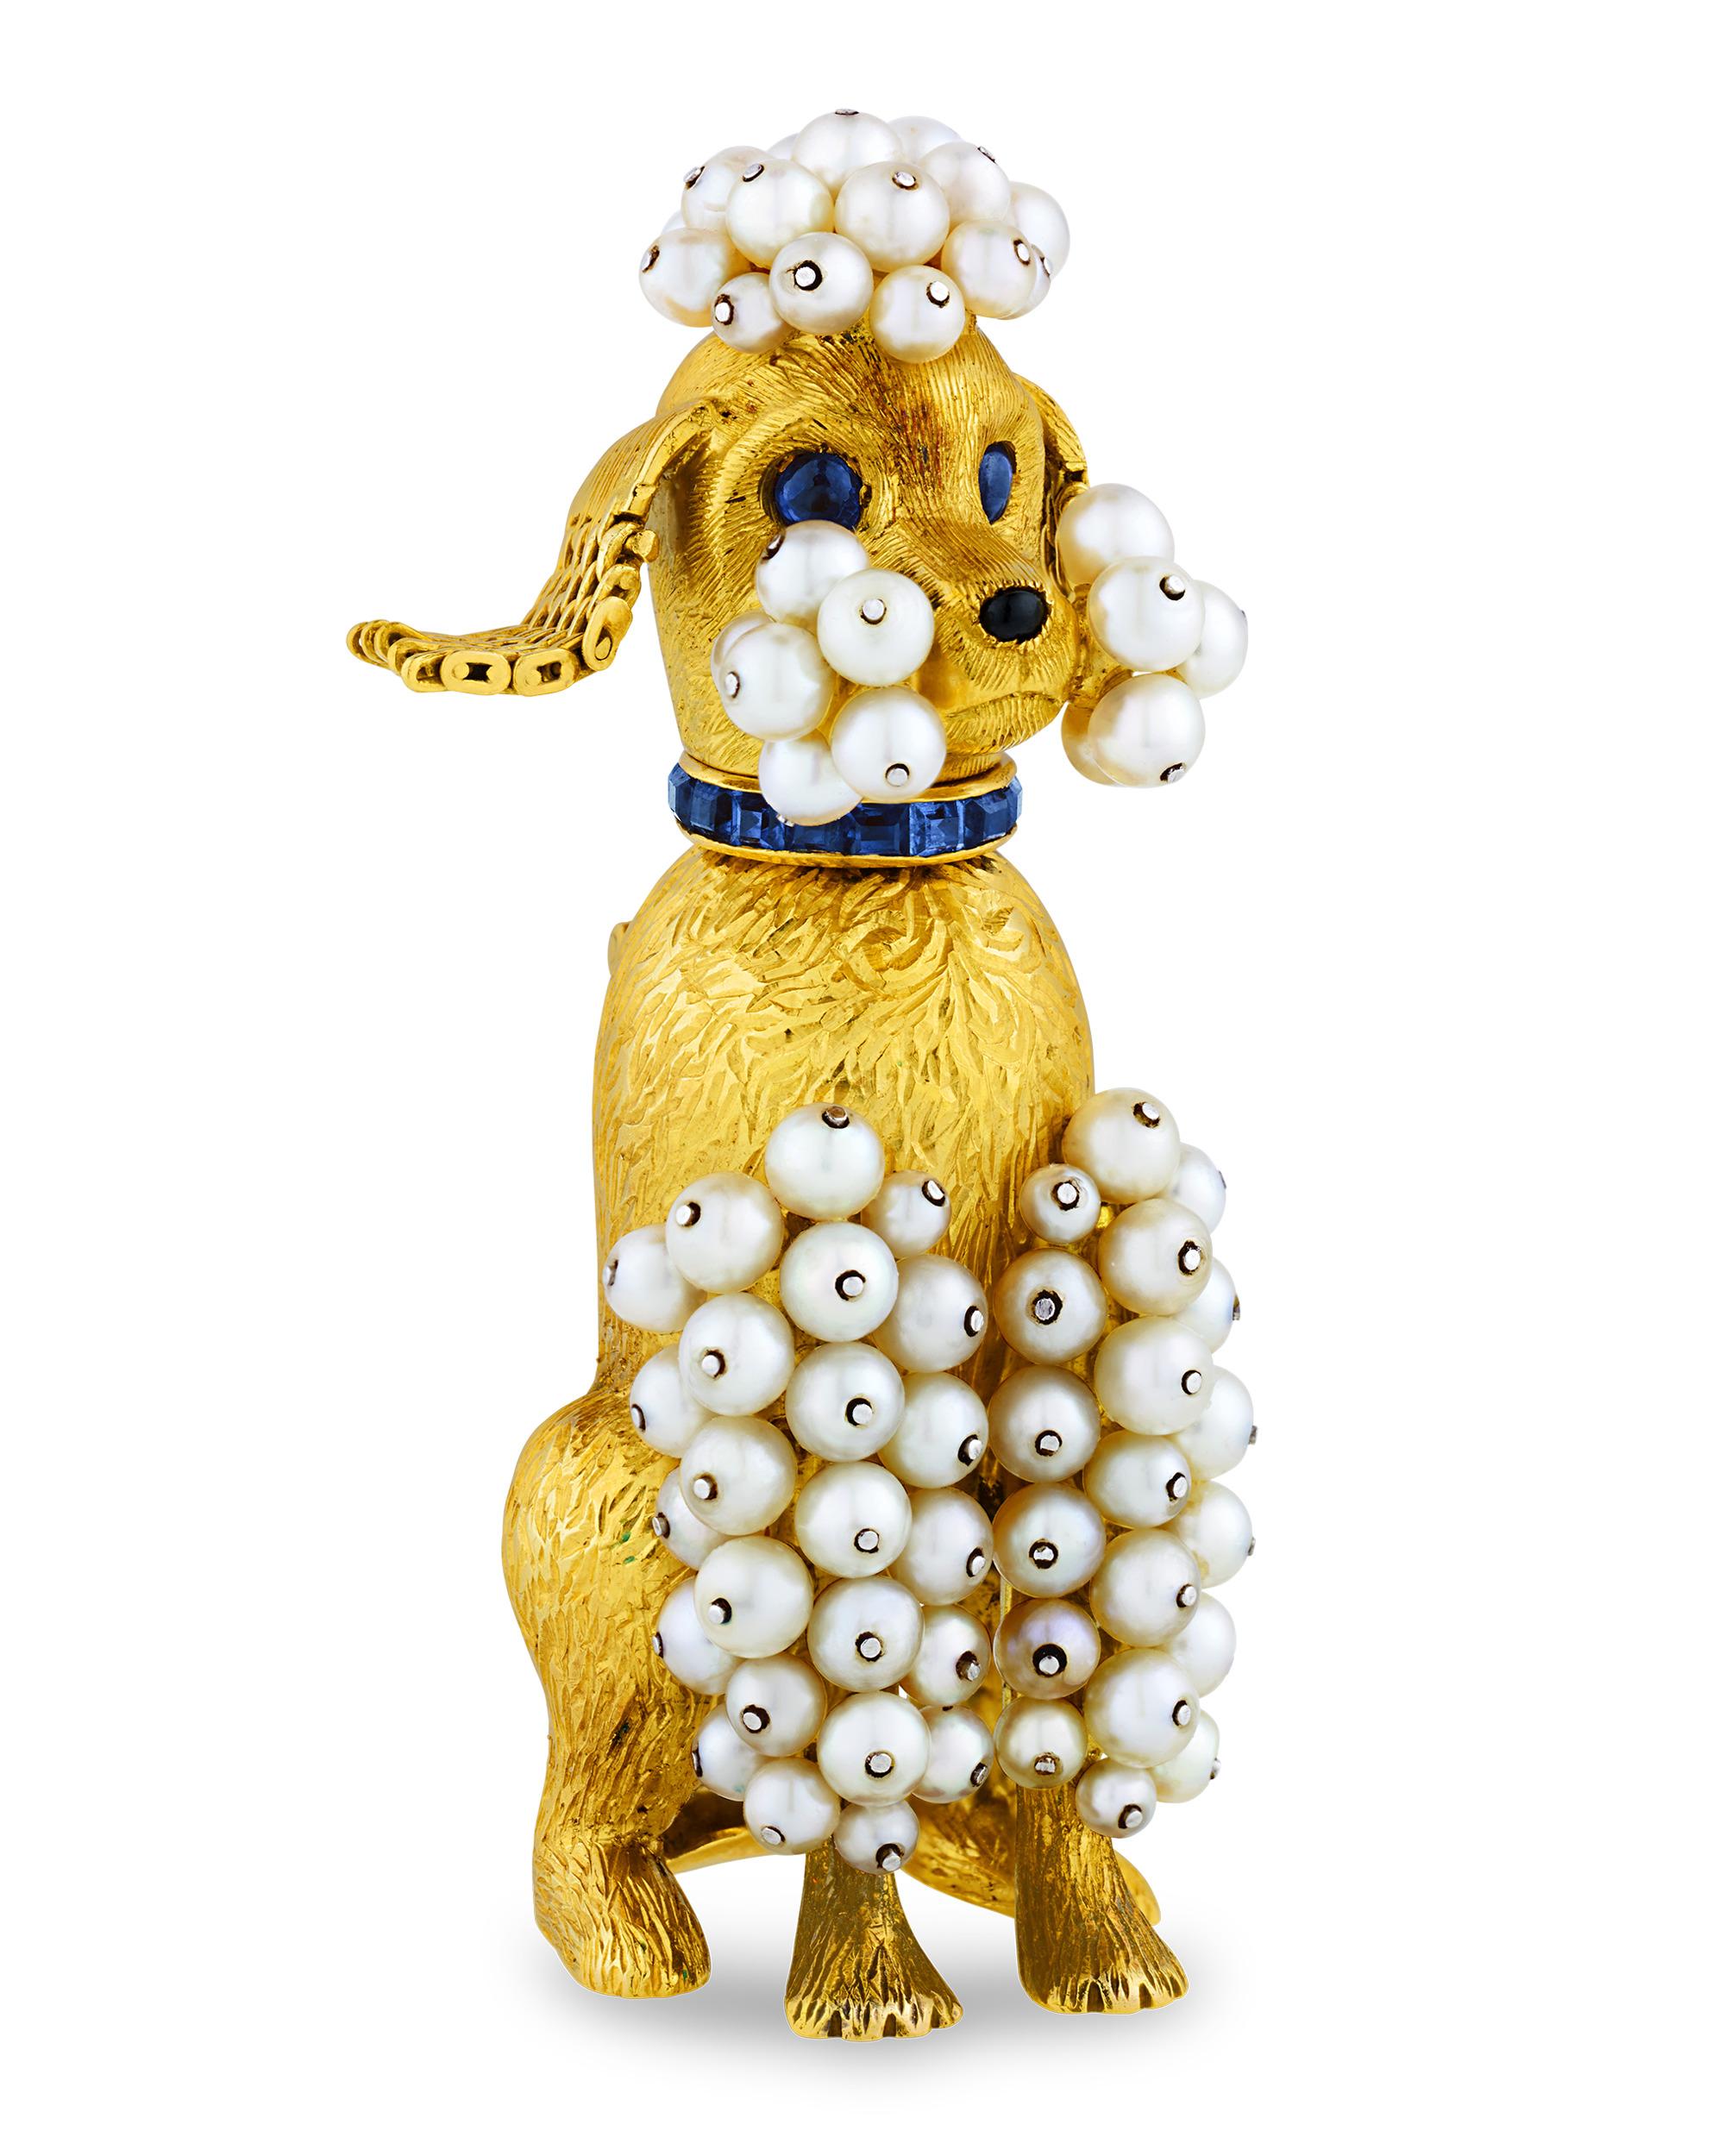 This delightful gold, sapphire and pearl poodle brooch showcases the more whimsical side of the legendary French jeweler Cartier. The playful yet elegant brooch features a poodle sitting at attention. The pooch is modeled from textured 18K gold and